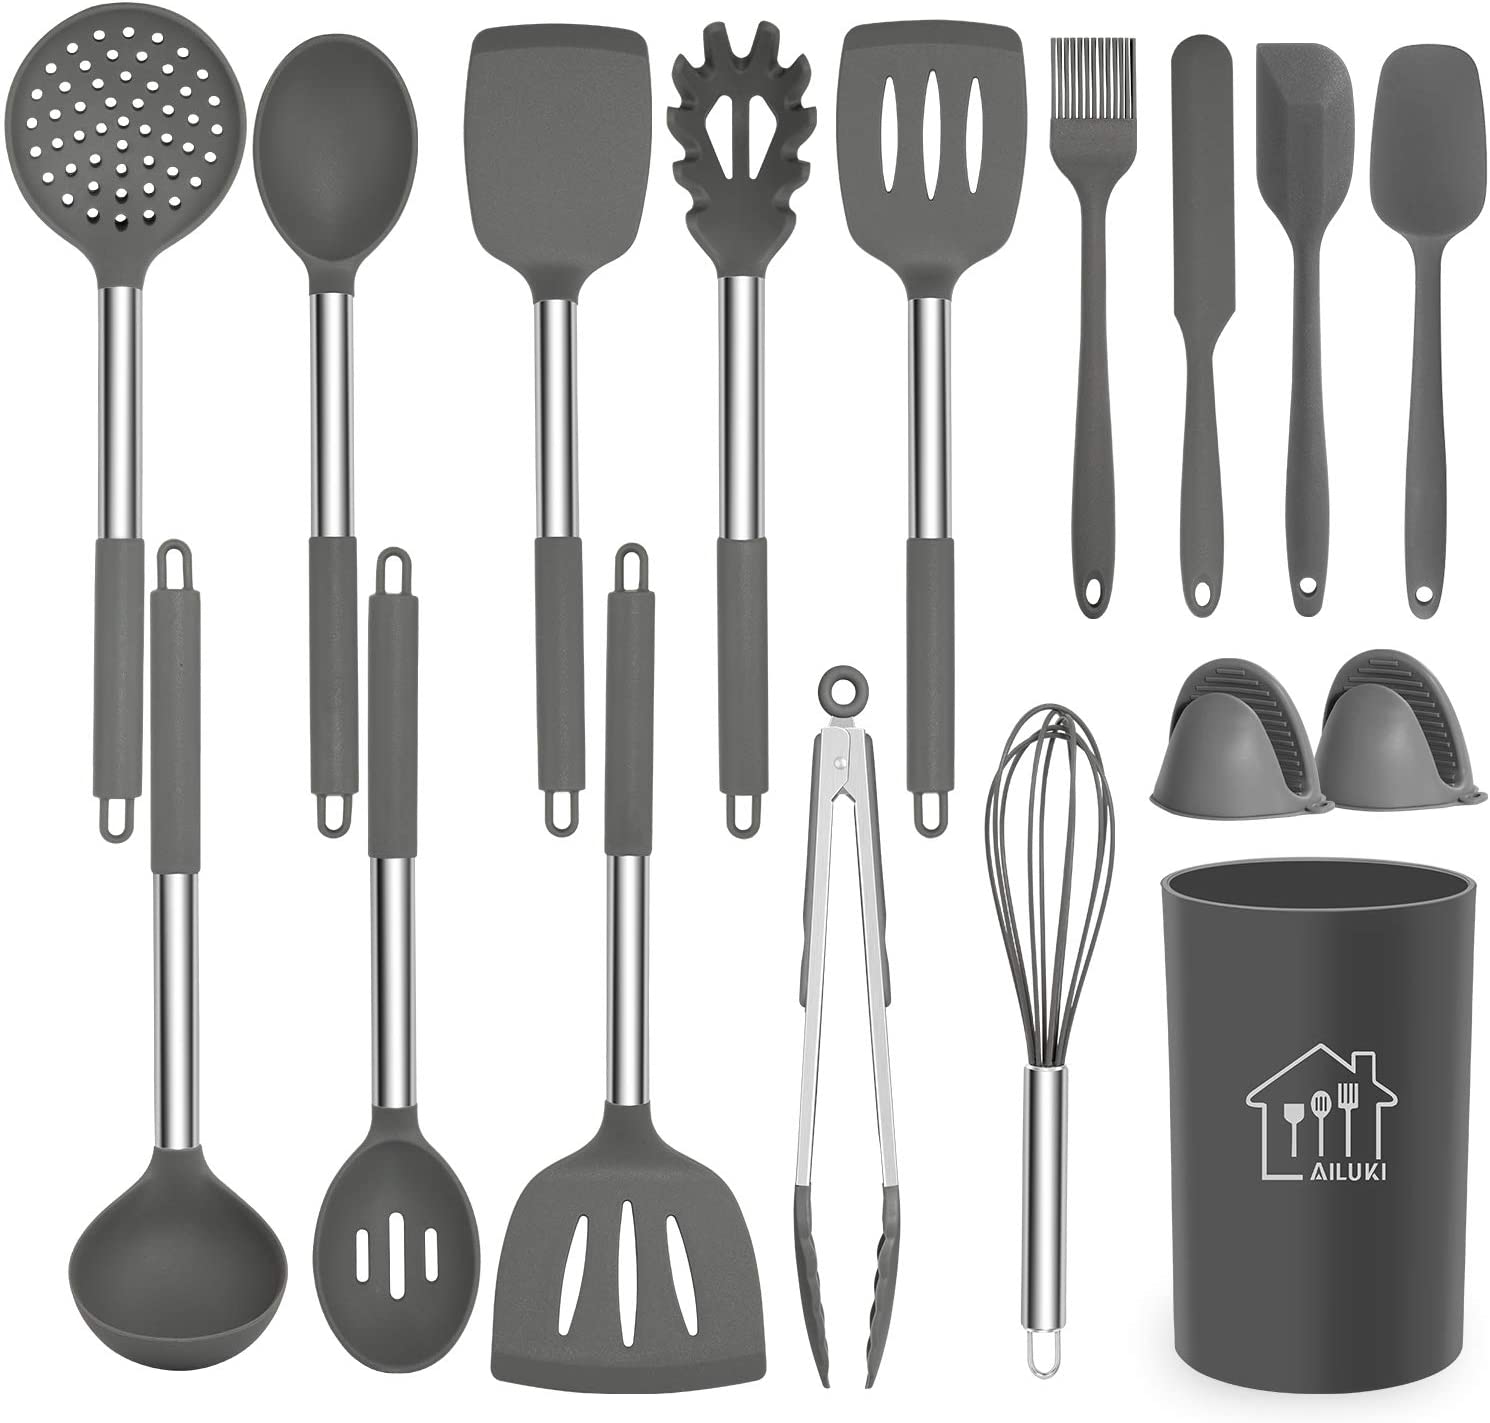 Silicone Cooking Utensil Set, AILUKI Kitchen Utensils 17 Pcs Cooking Utensils Set,Non-stick Heat Resistant Silicone,Cookware with Stainless Steel Handle - Grey